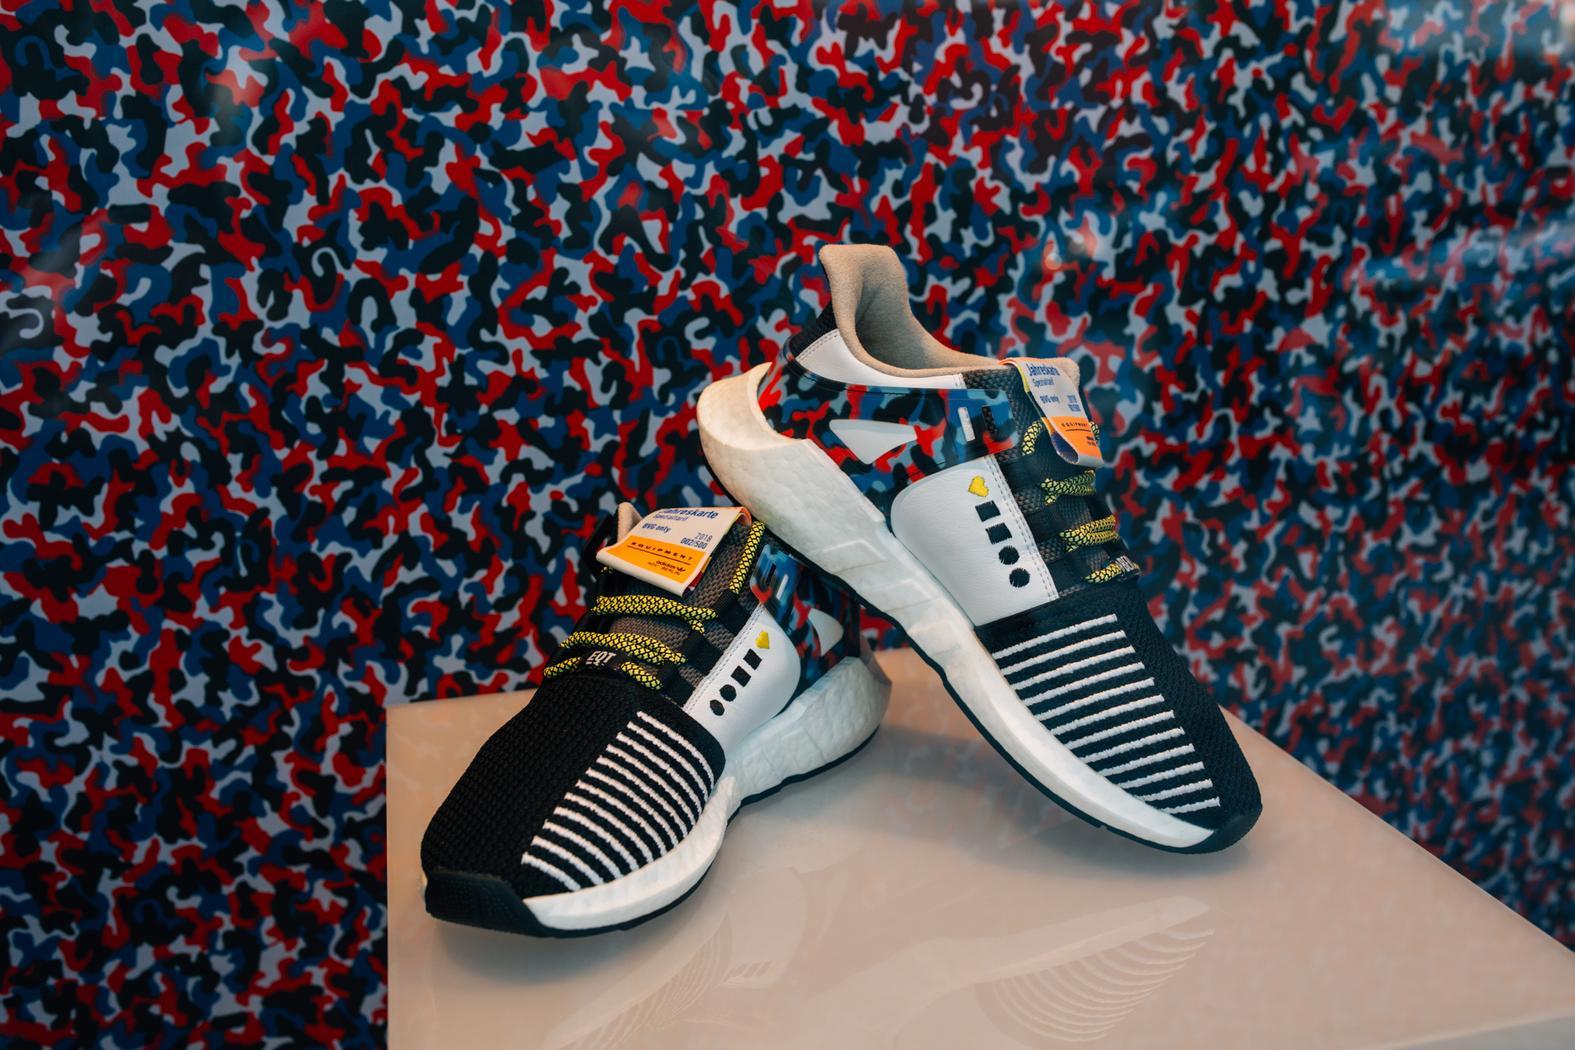 Experto construir tensión These Limited Edition Trainers Double as a Free Annual Underground Ticket